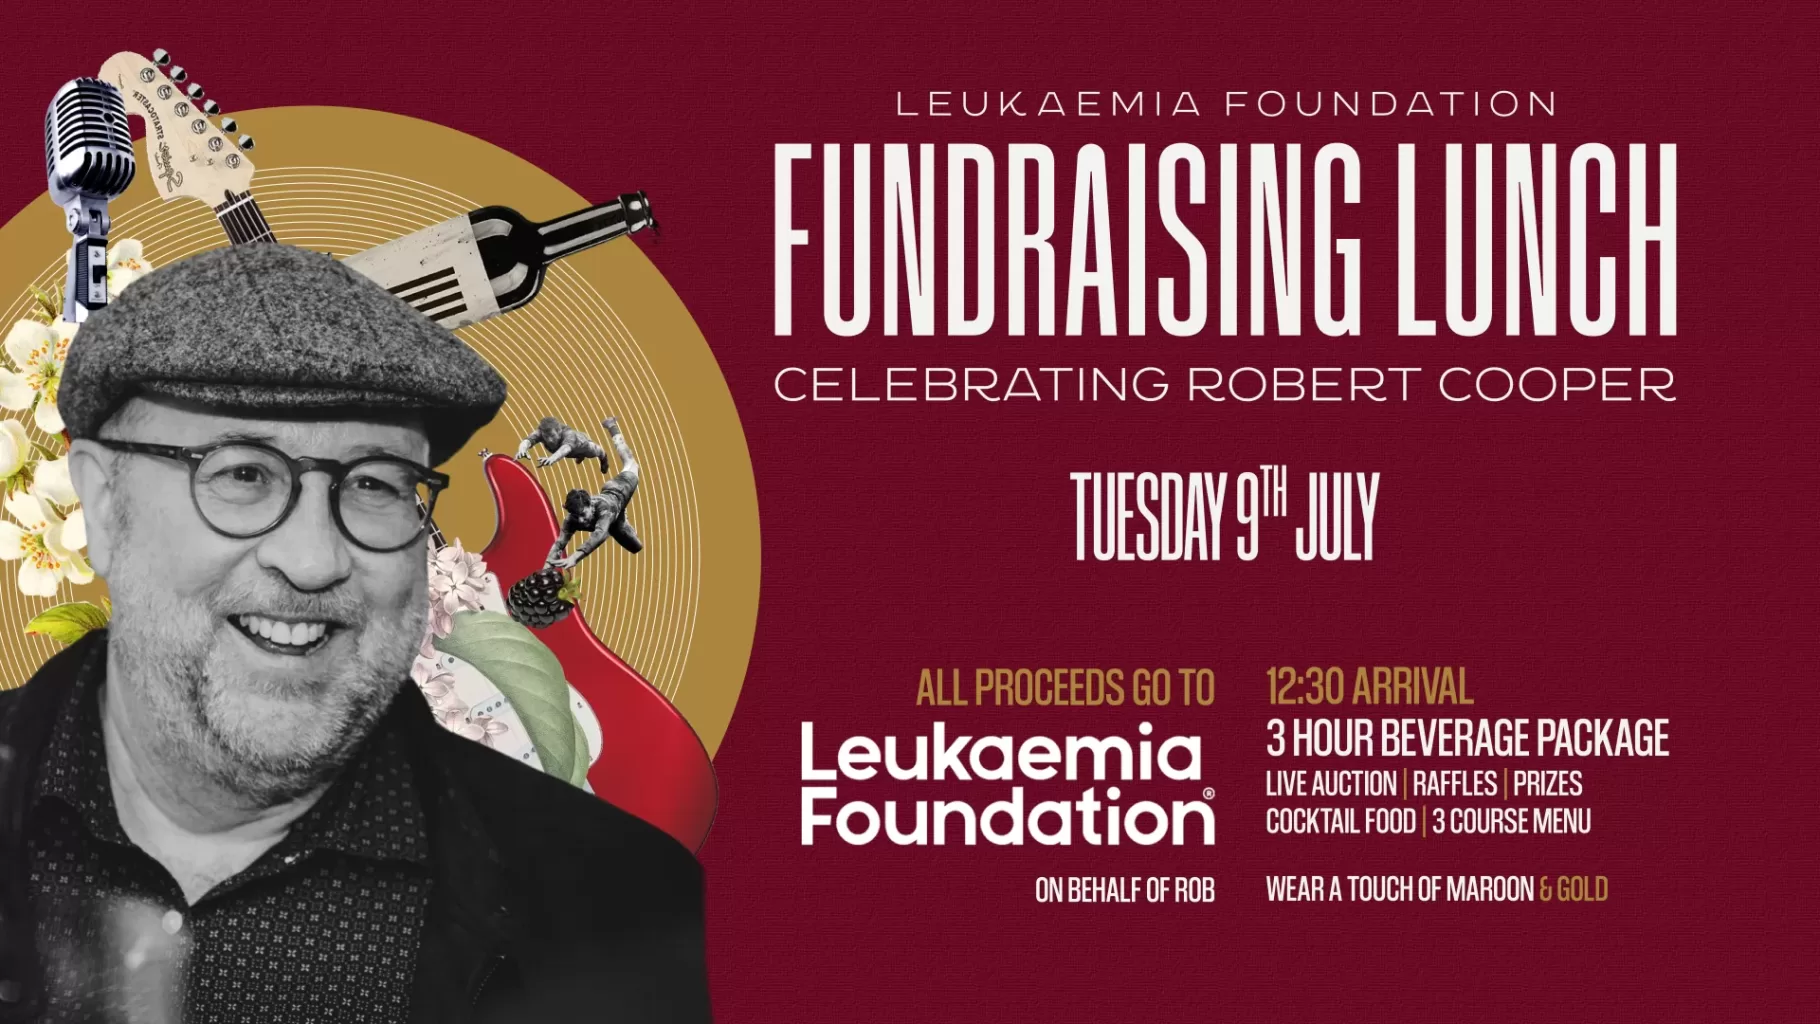 Leukaemia Foundation Fundraiser Lunch – Robert Cooper | Events at The Prince Consort